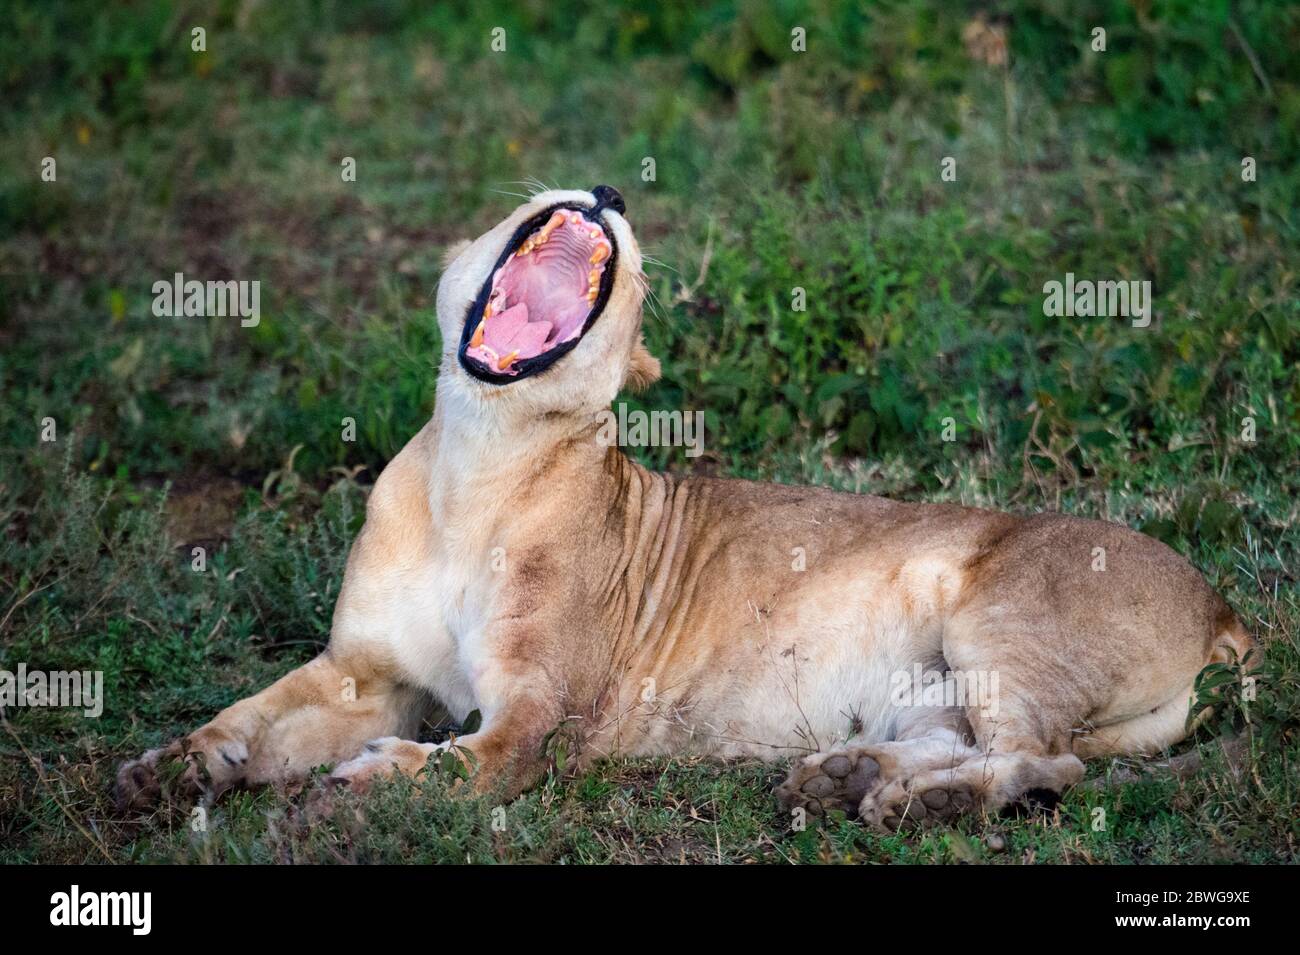 Close up of lioness (Panthera leo) lying with open mouth, Ngorongoro Conservation Area, Tanzania, Africa Stock Photo